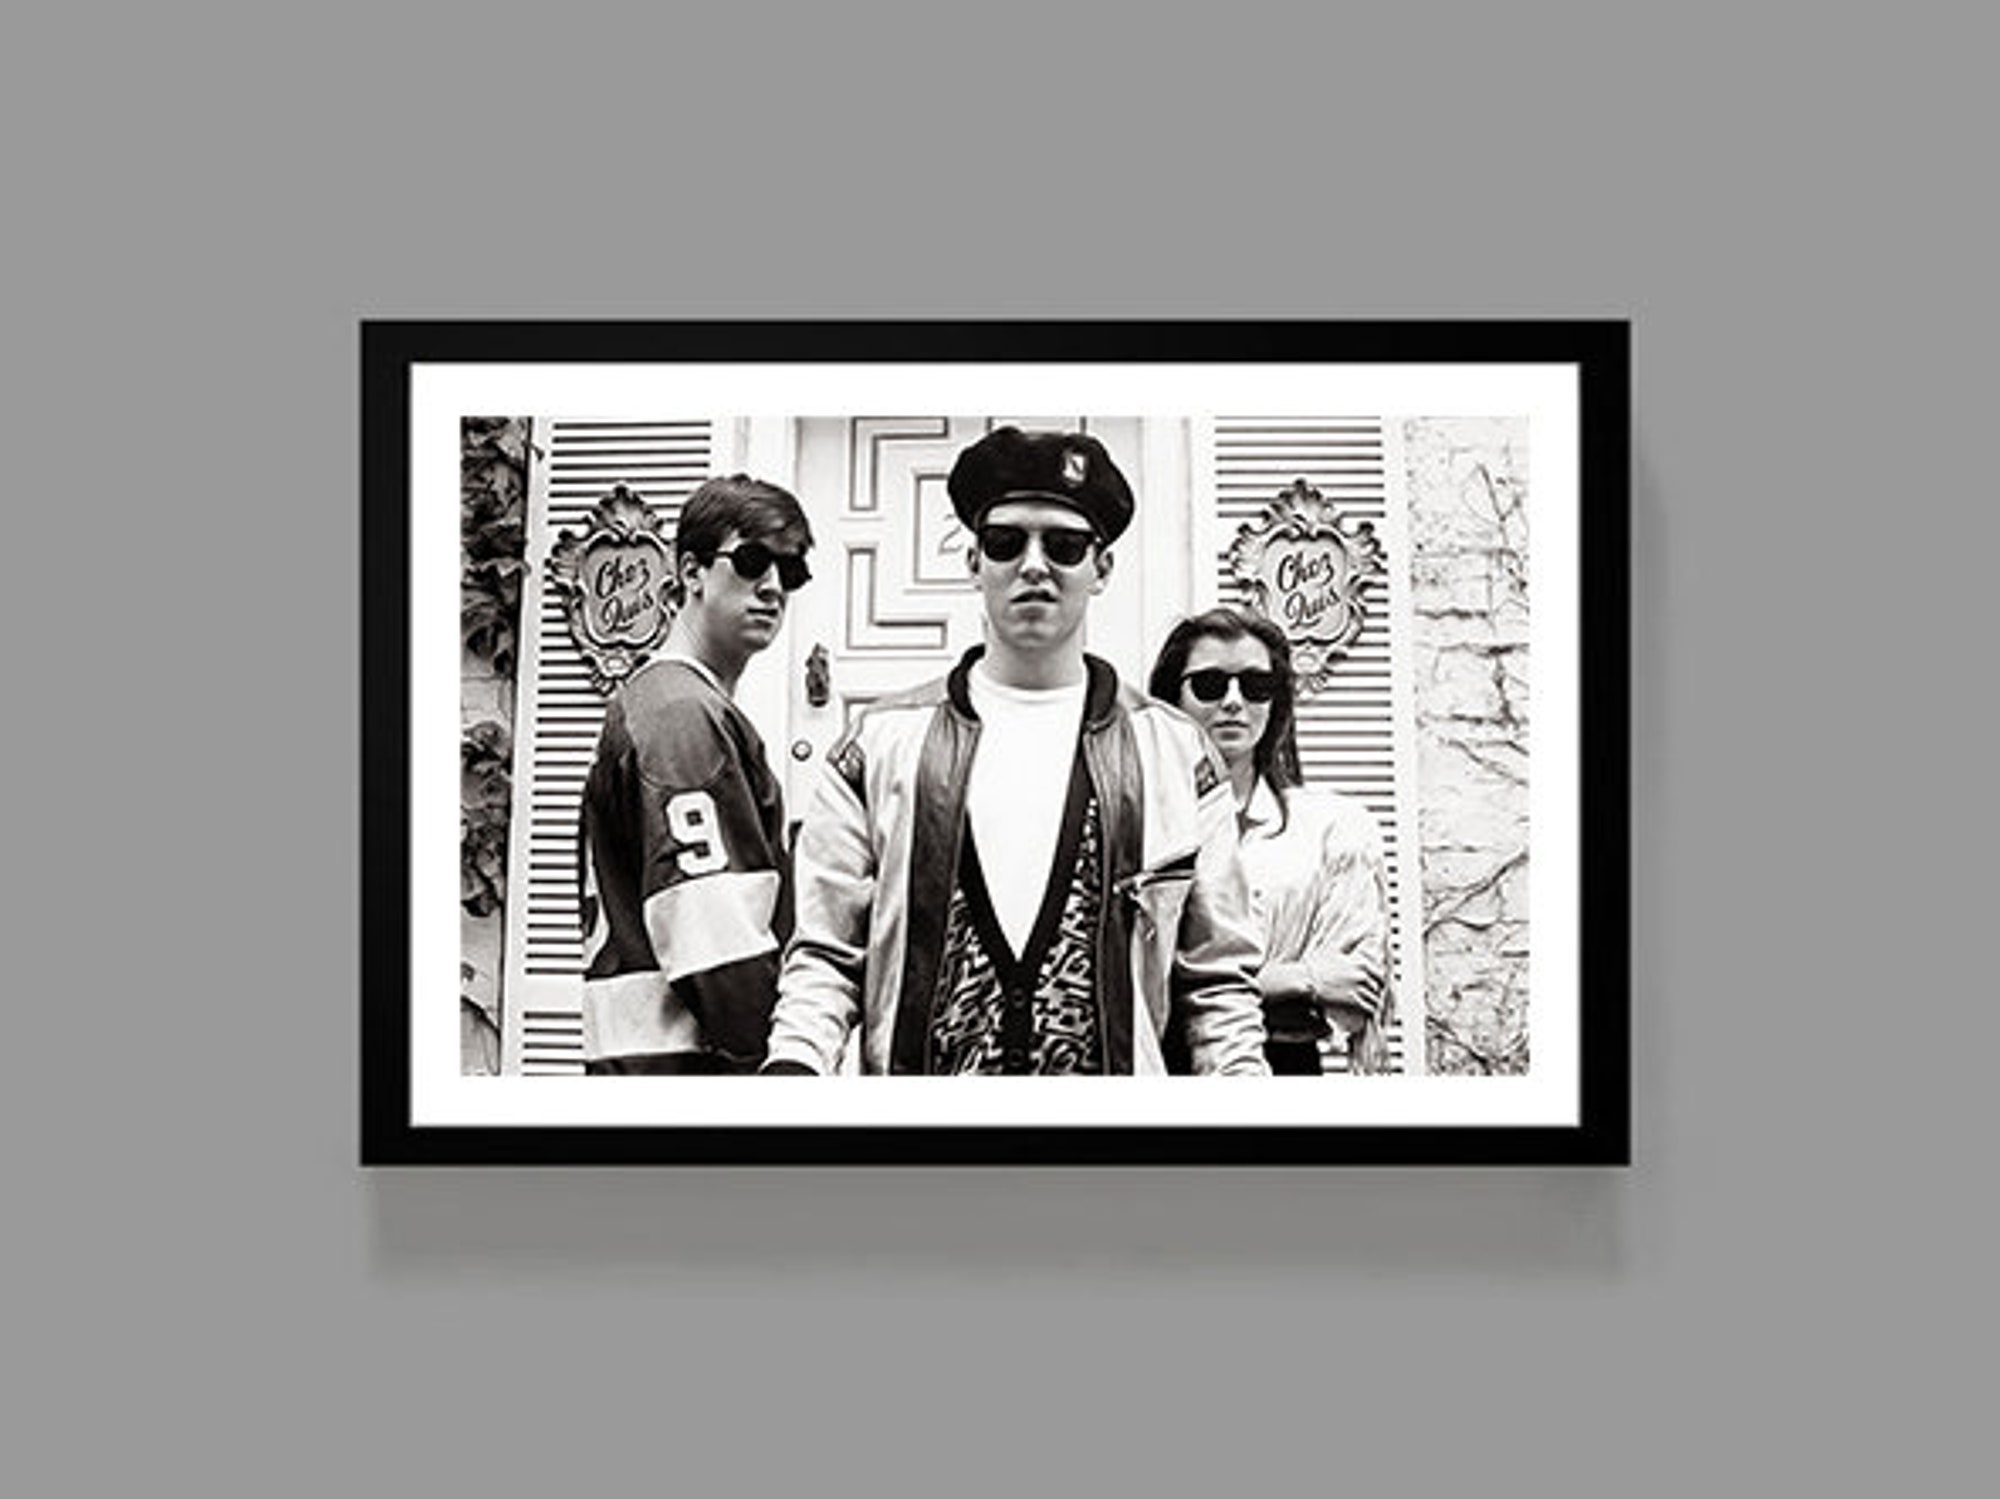 Discover Ferris Bueller's Day Off Movie - Funny Poster Print - Chez Luis, Movie Poster, 80's Comedy